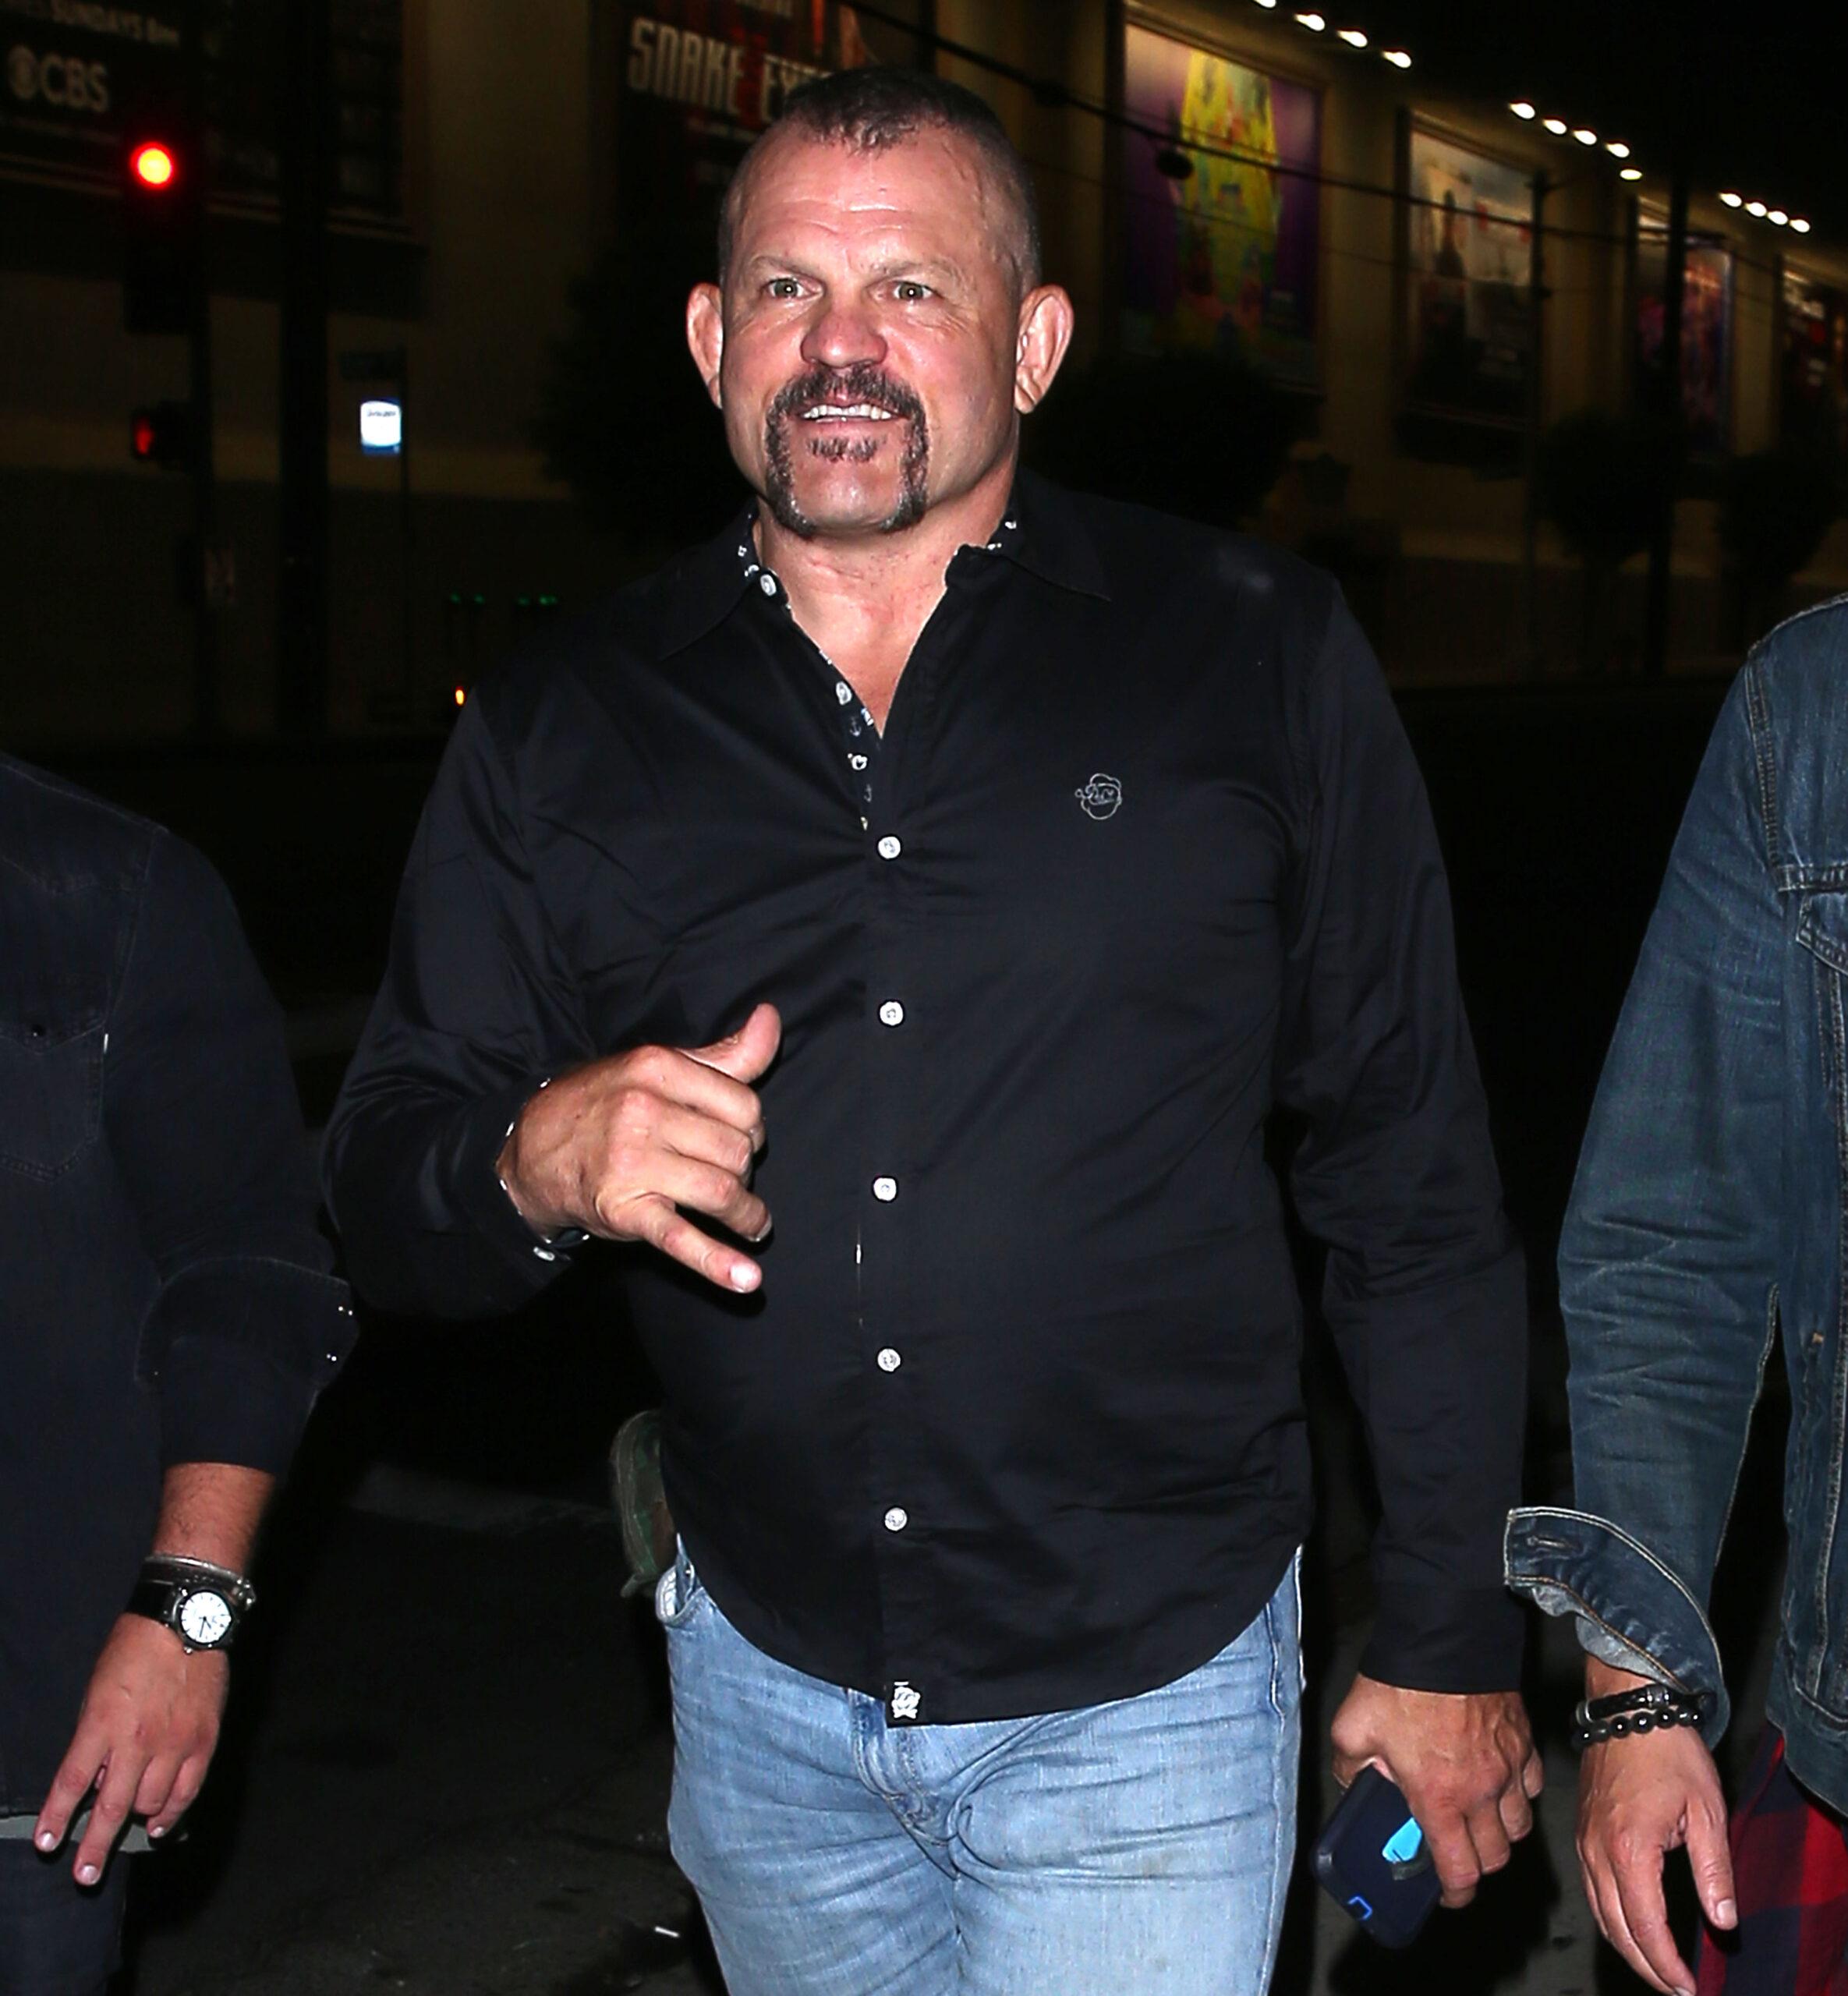 'UFC' Star Chuck Liddell's Ex-Wife Claims He Is Suffering From 'Traumatic Brain' Injury